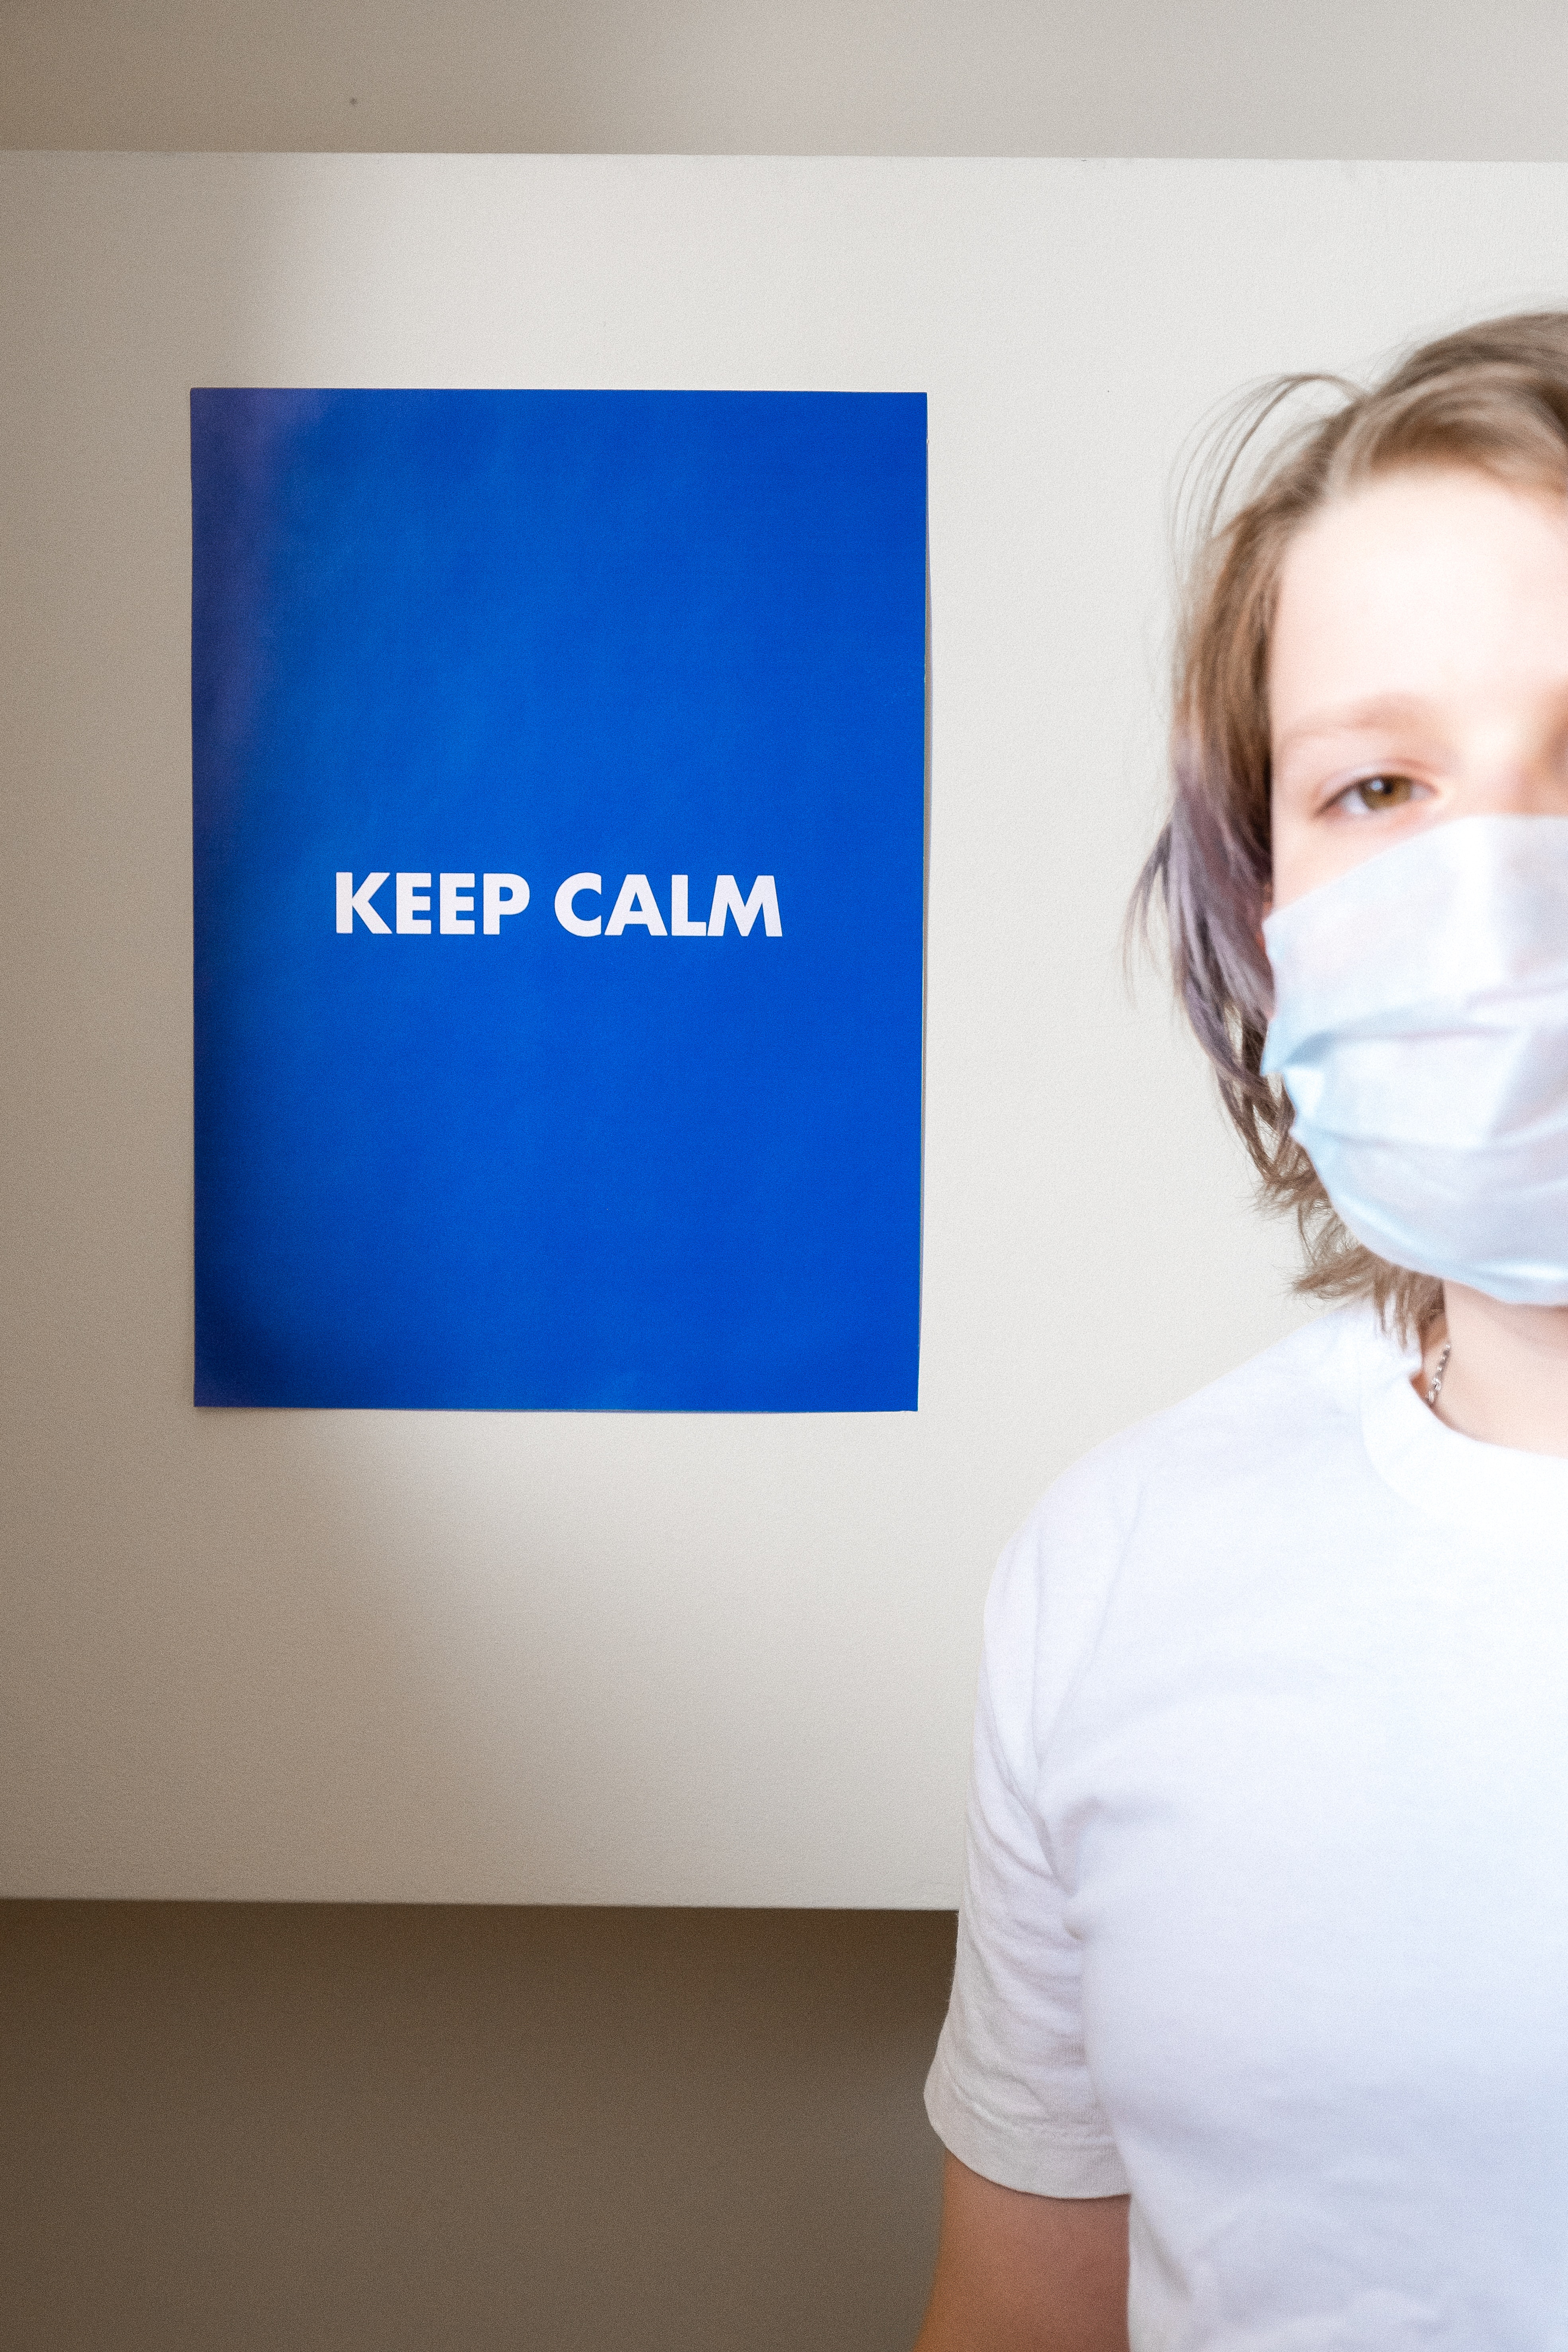 A young woman with chin-length shaggy blonde hair wears a white shirt and stands next to a royal blue sign with the words "Keep calm" printed on it in white block letters. The woman wears a cloth face mask over her mouth.